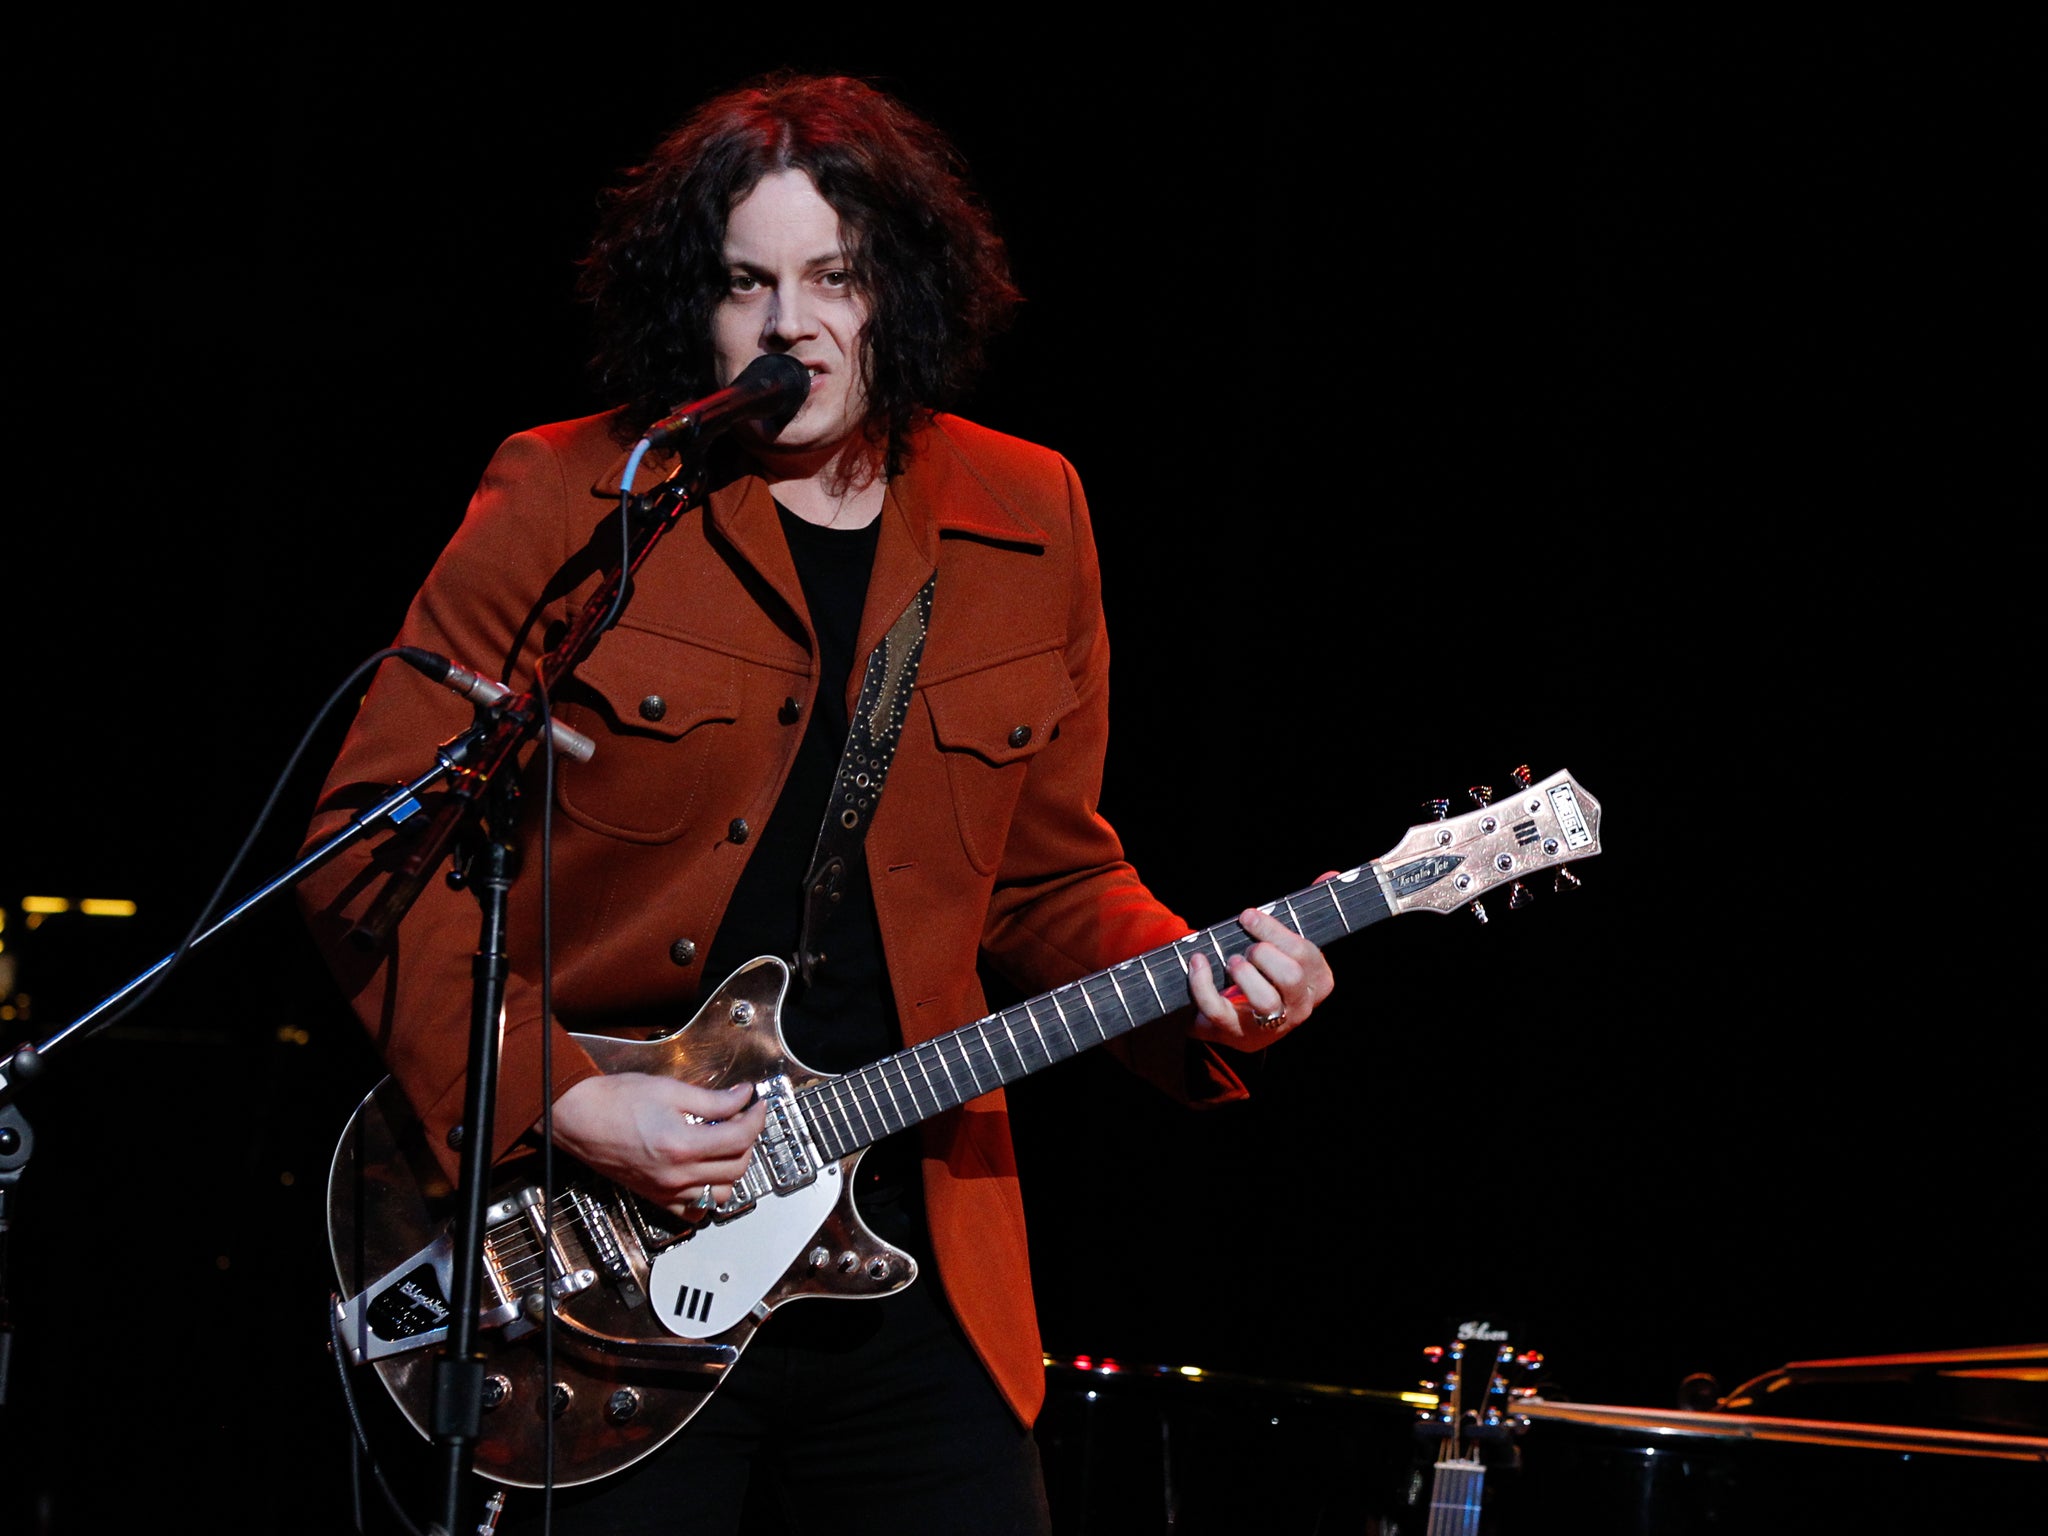 Jack White, the former White Stripes frontman, is attempting to break the record for the “world’s fastest released record” from studio to store